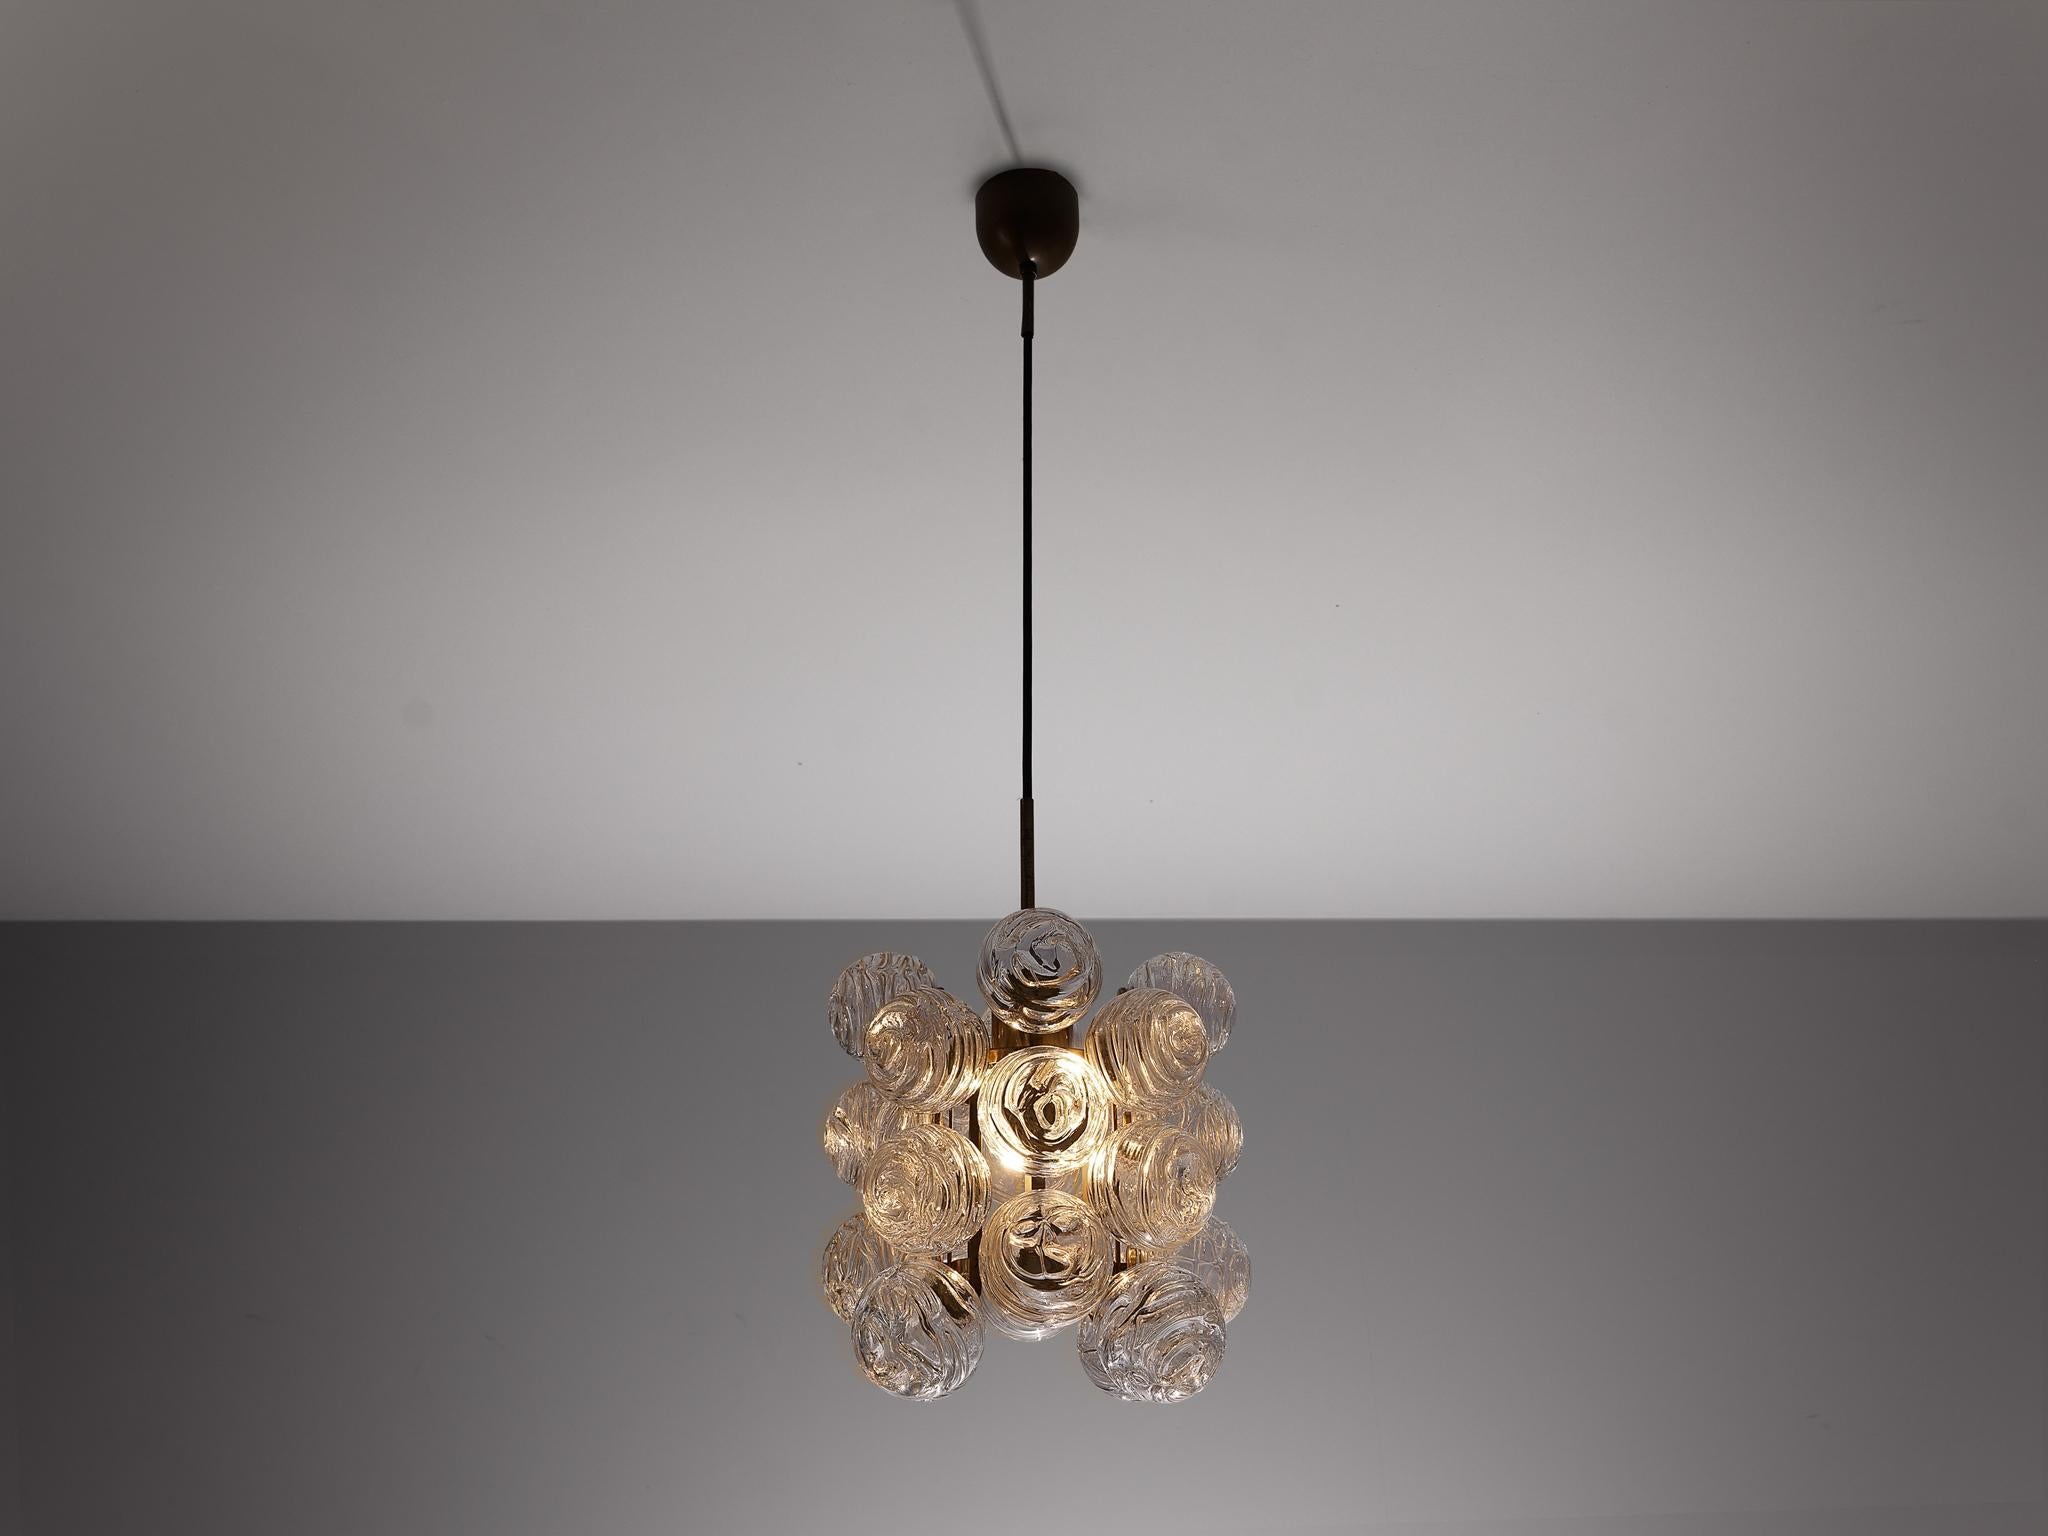 Doria Leuchten, chandelier, brass, glass, Germany, 1960s 

This elegant chandelier is decorated with textured glass spheres which are attached to a patinated brass fixture. The light from within the shade shines through the snowballs, creating a